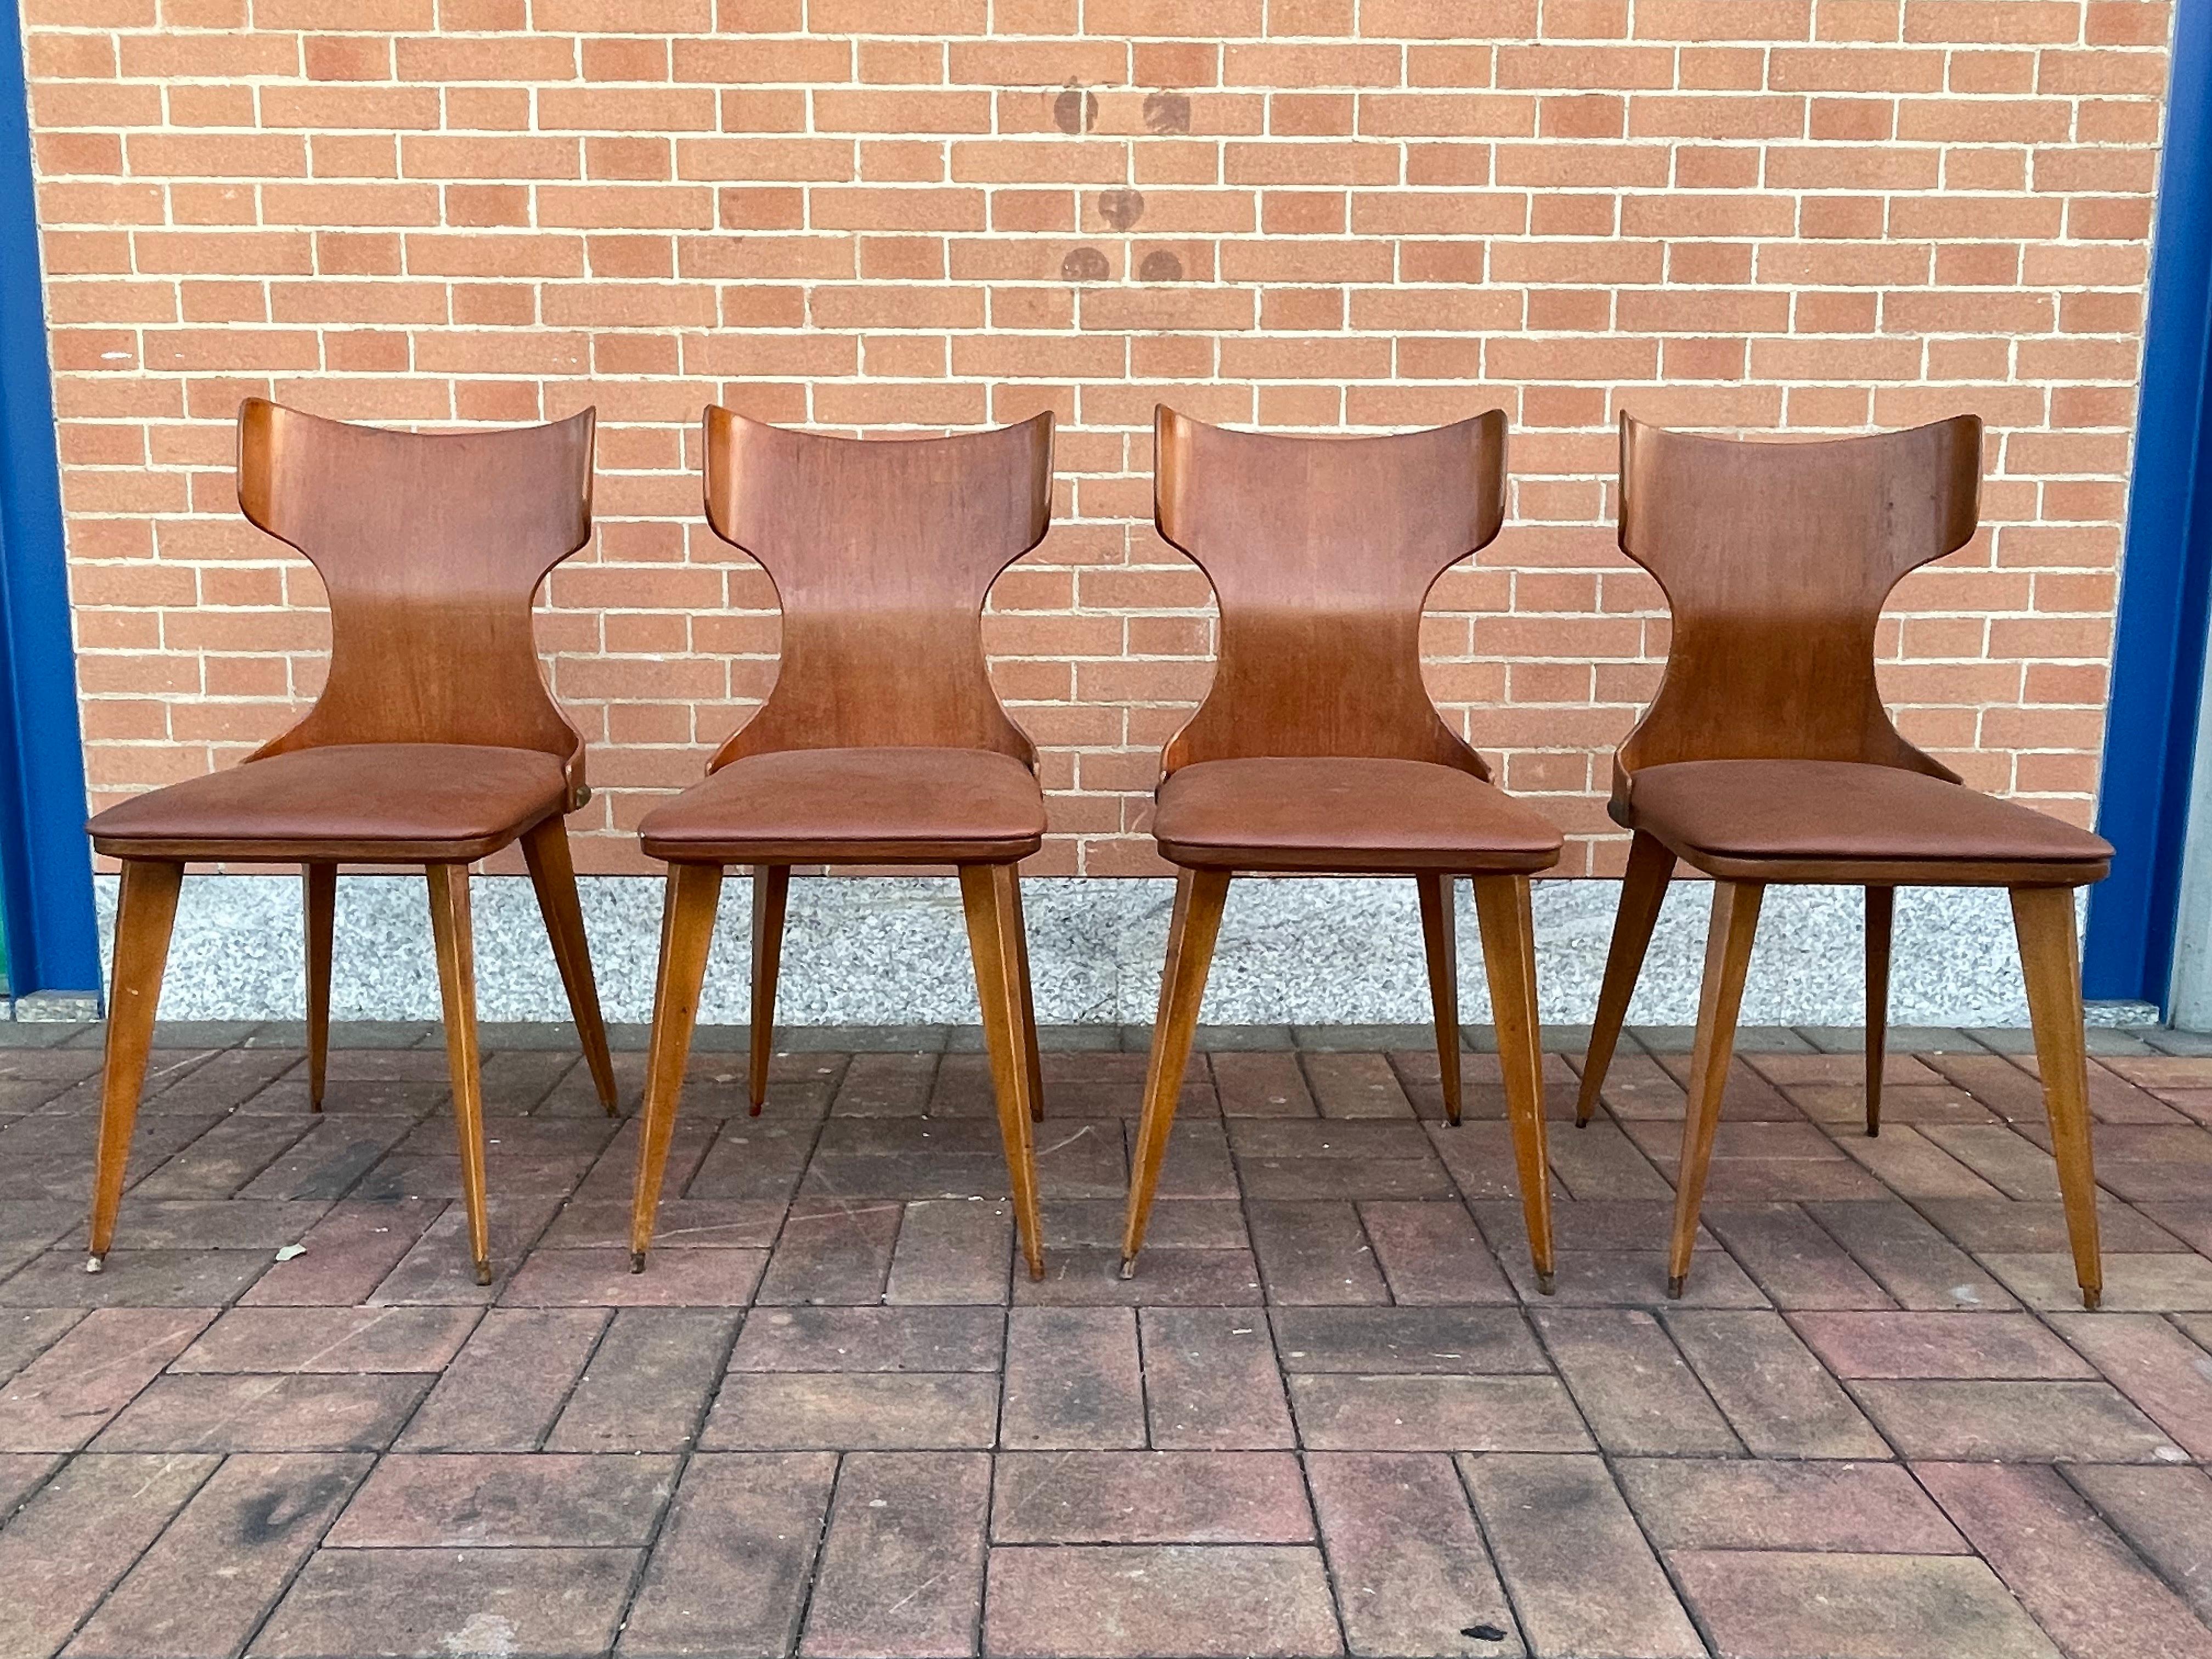 Set of 4 chairs designed by Carlo Ratti and produced by the Compensati Curvi Company (Monza - Italy) in the 1950s.
Shell in curved wood with original faux leather seat.
The chairs have a very pleasant seat as well as being a typical expression of